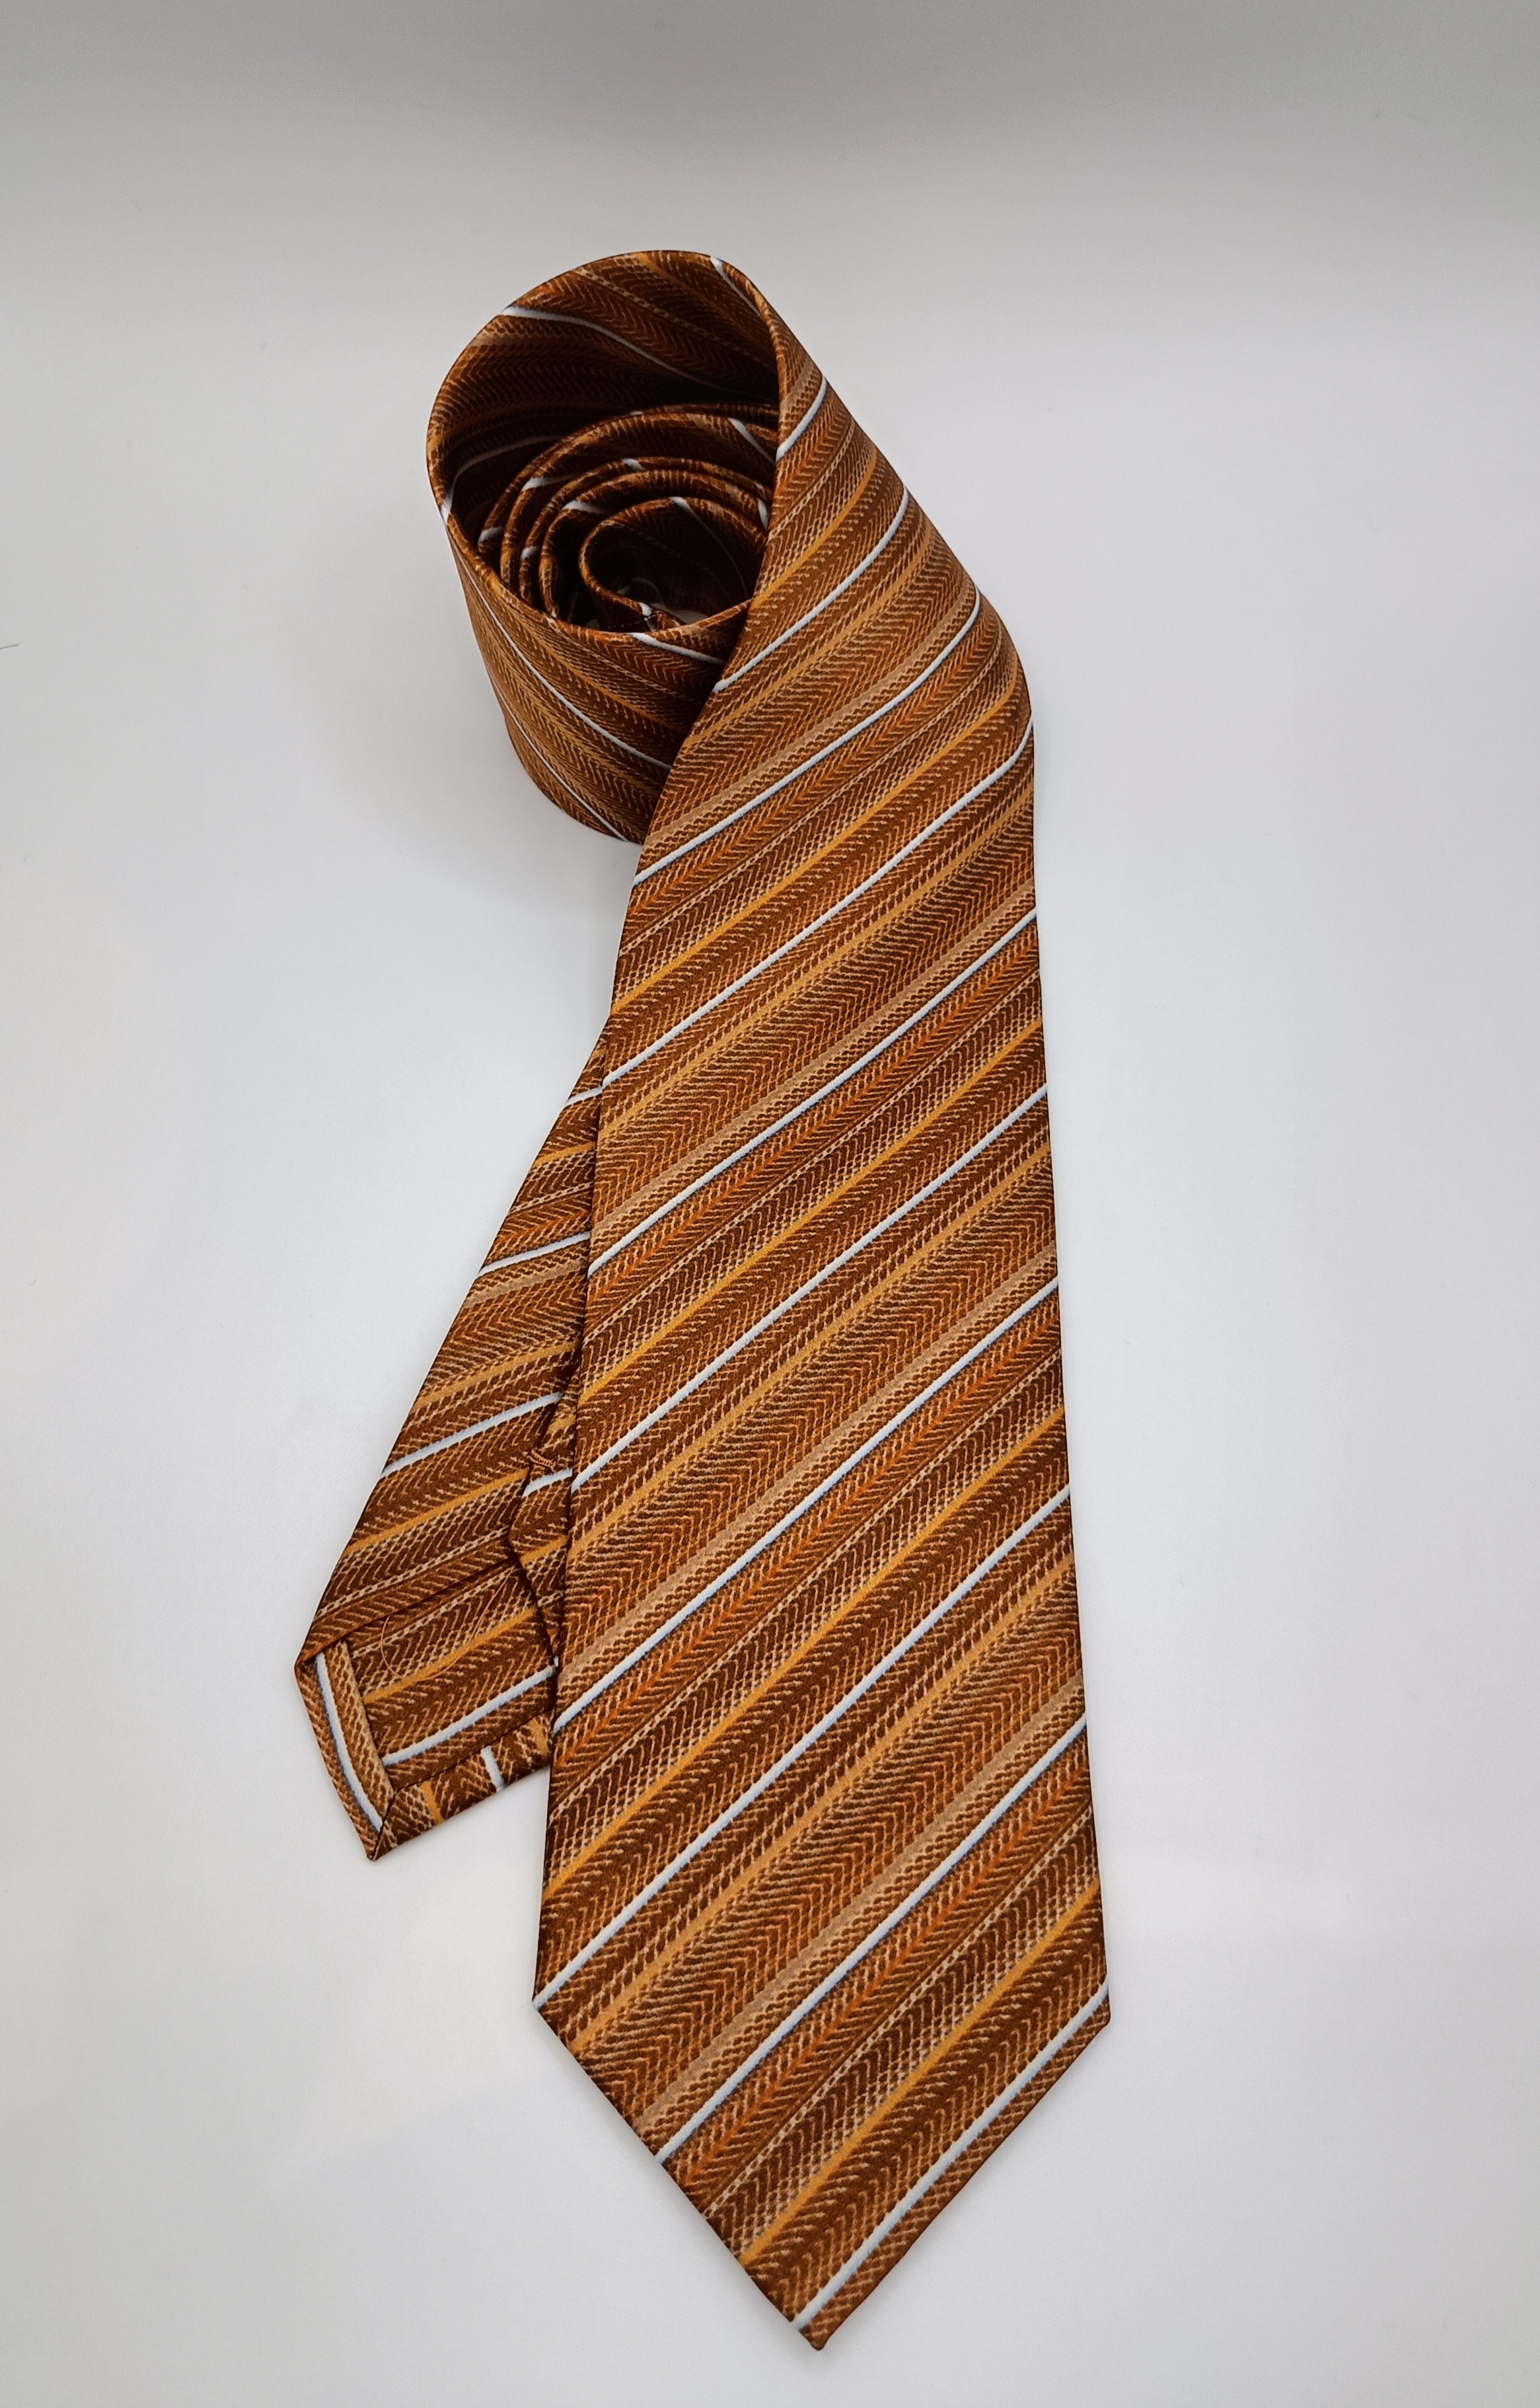 Pure silk three fold tie, handmade in Italy by Italian tailors. In this model, the tip of the tie is rounded to give a soft original touch-Sartoria Dei Duchi-Atri